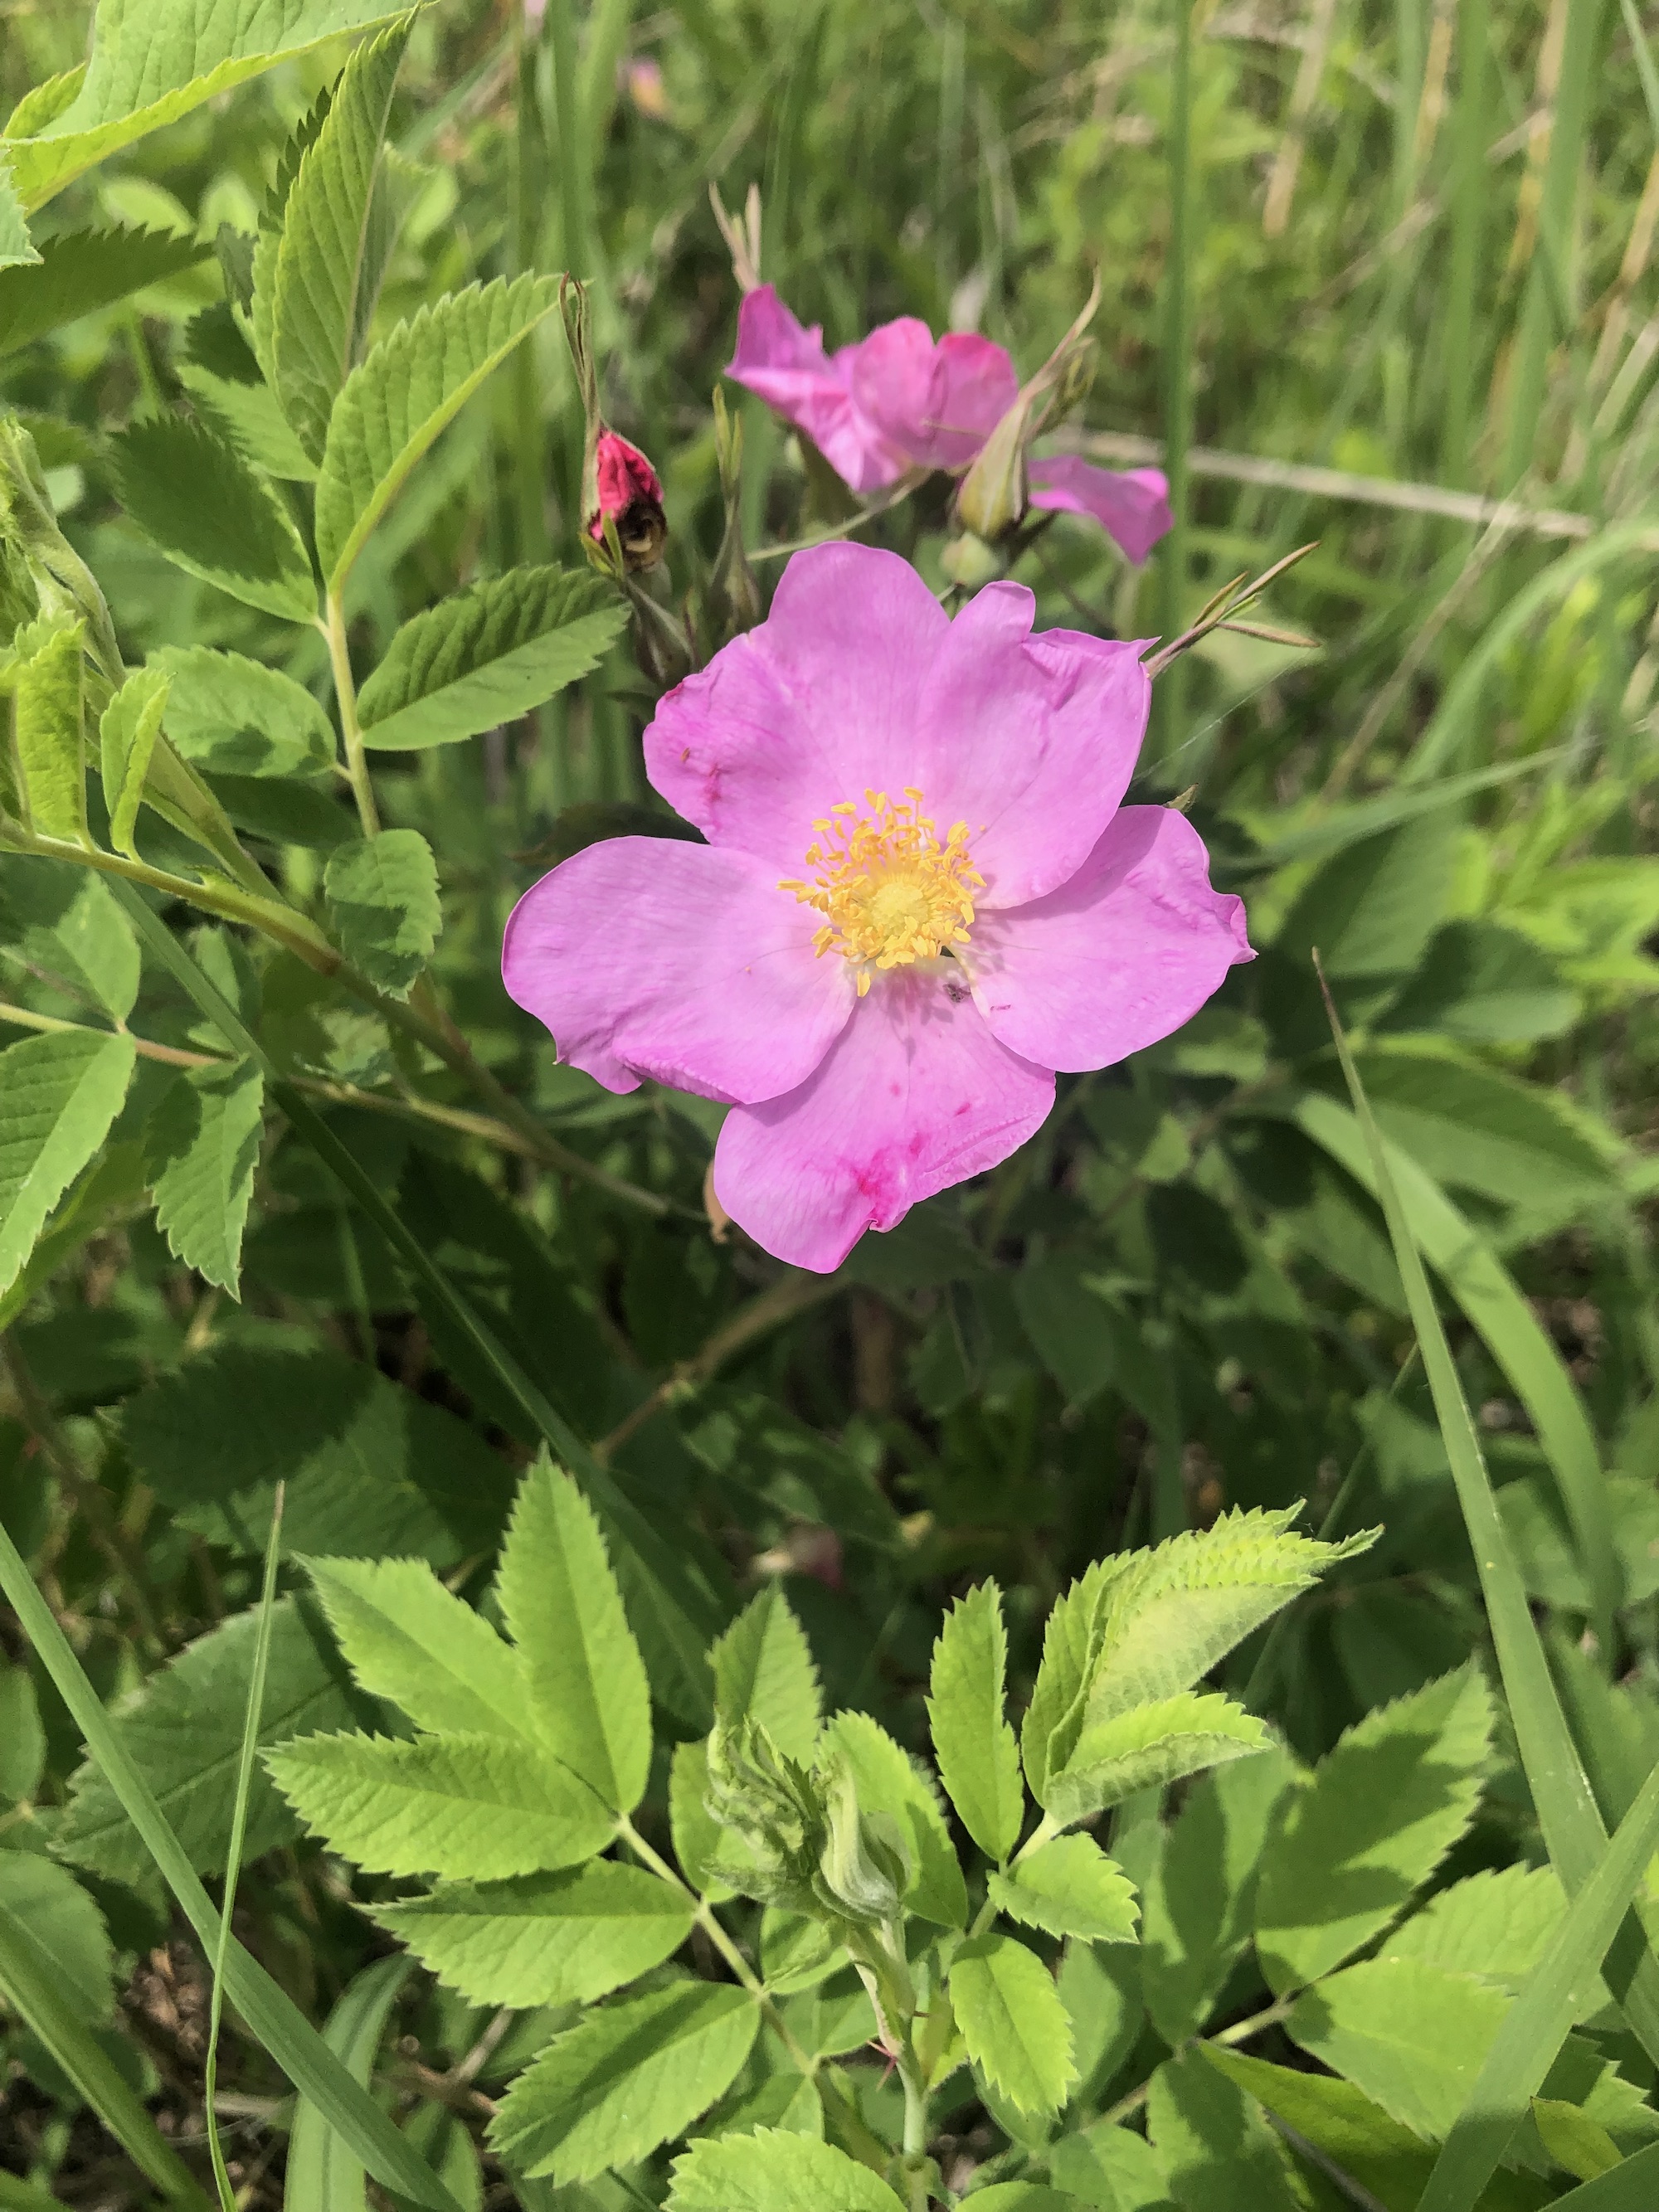 Prairie Rose in the Curtis Prairie in the University of Wisconsin-Madison Arboretum in Madison, Wisconsin on June 7, 2022.